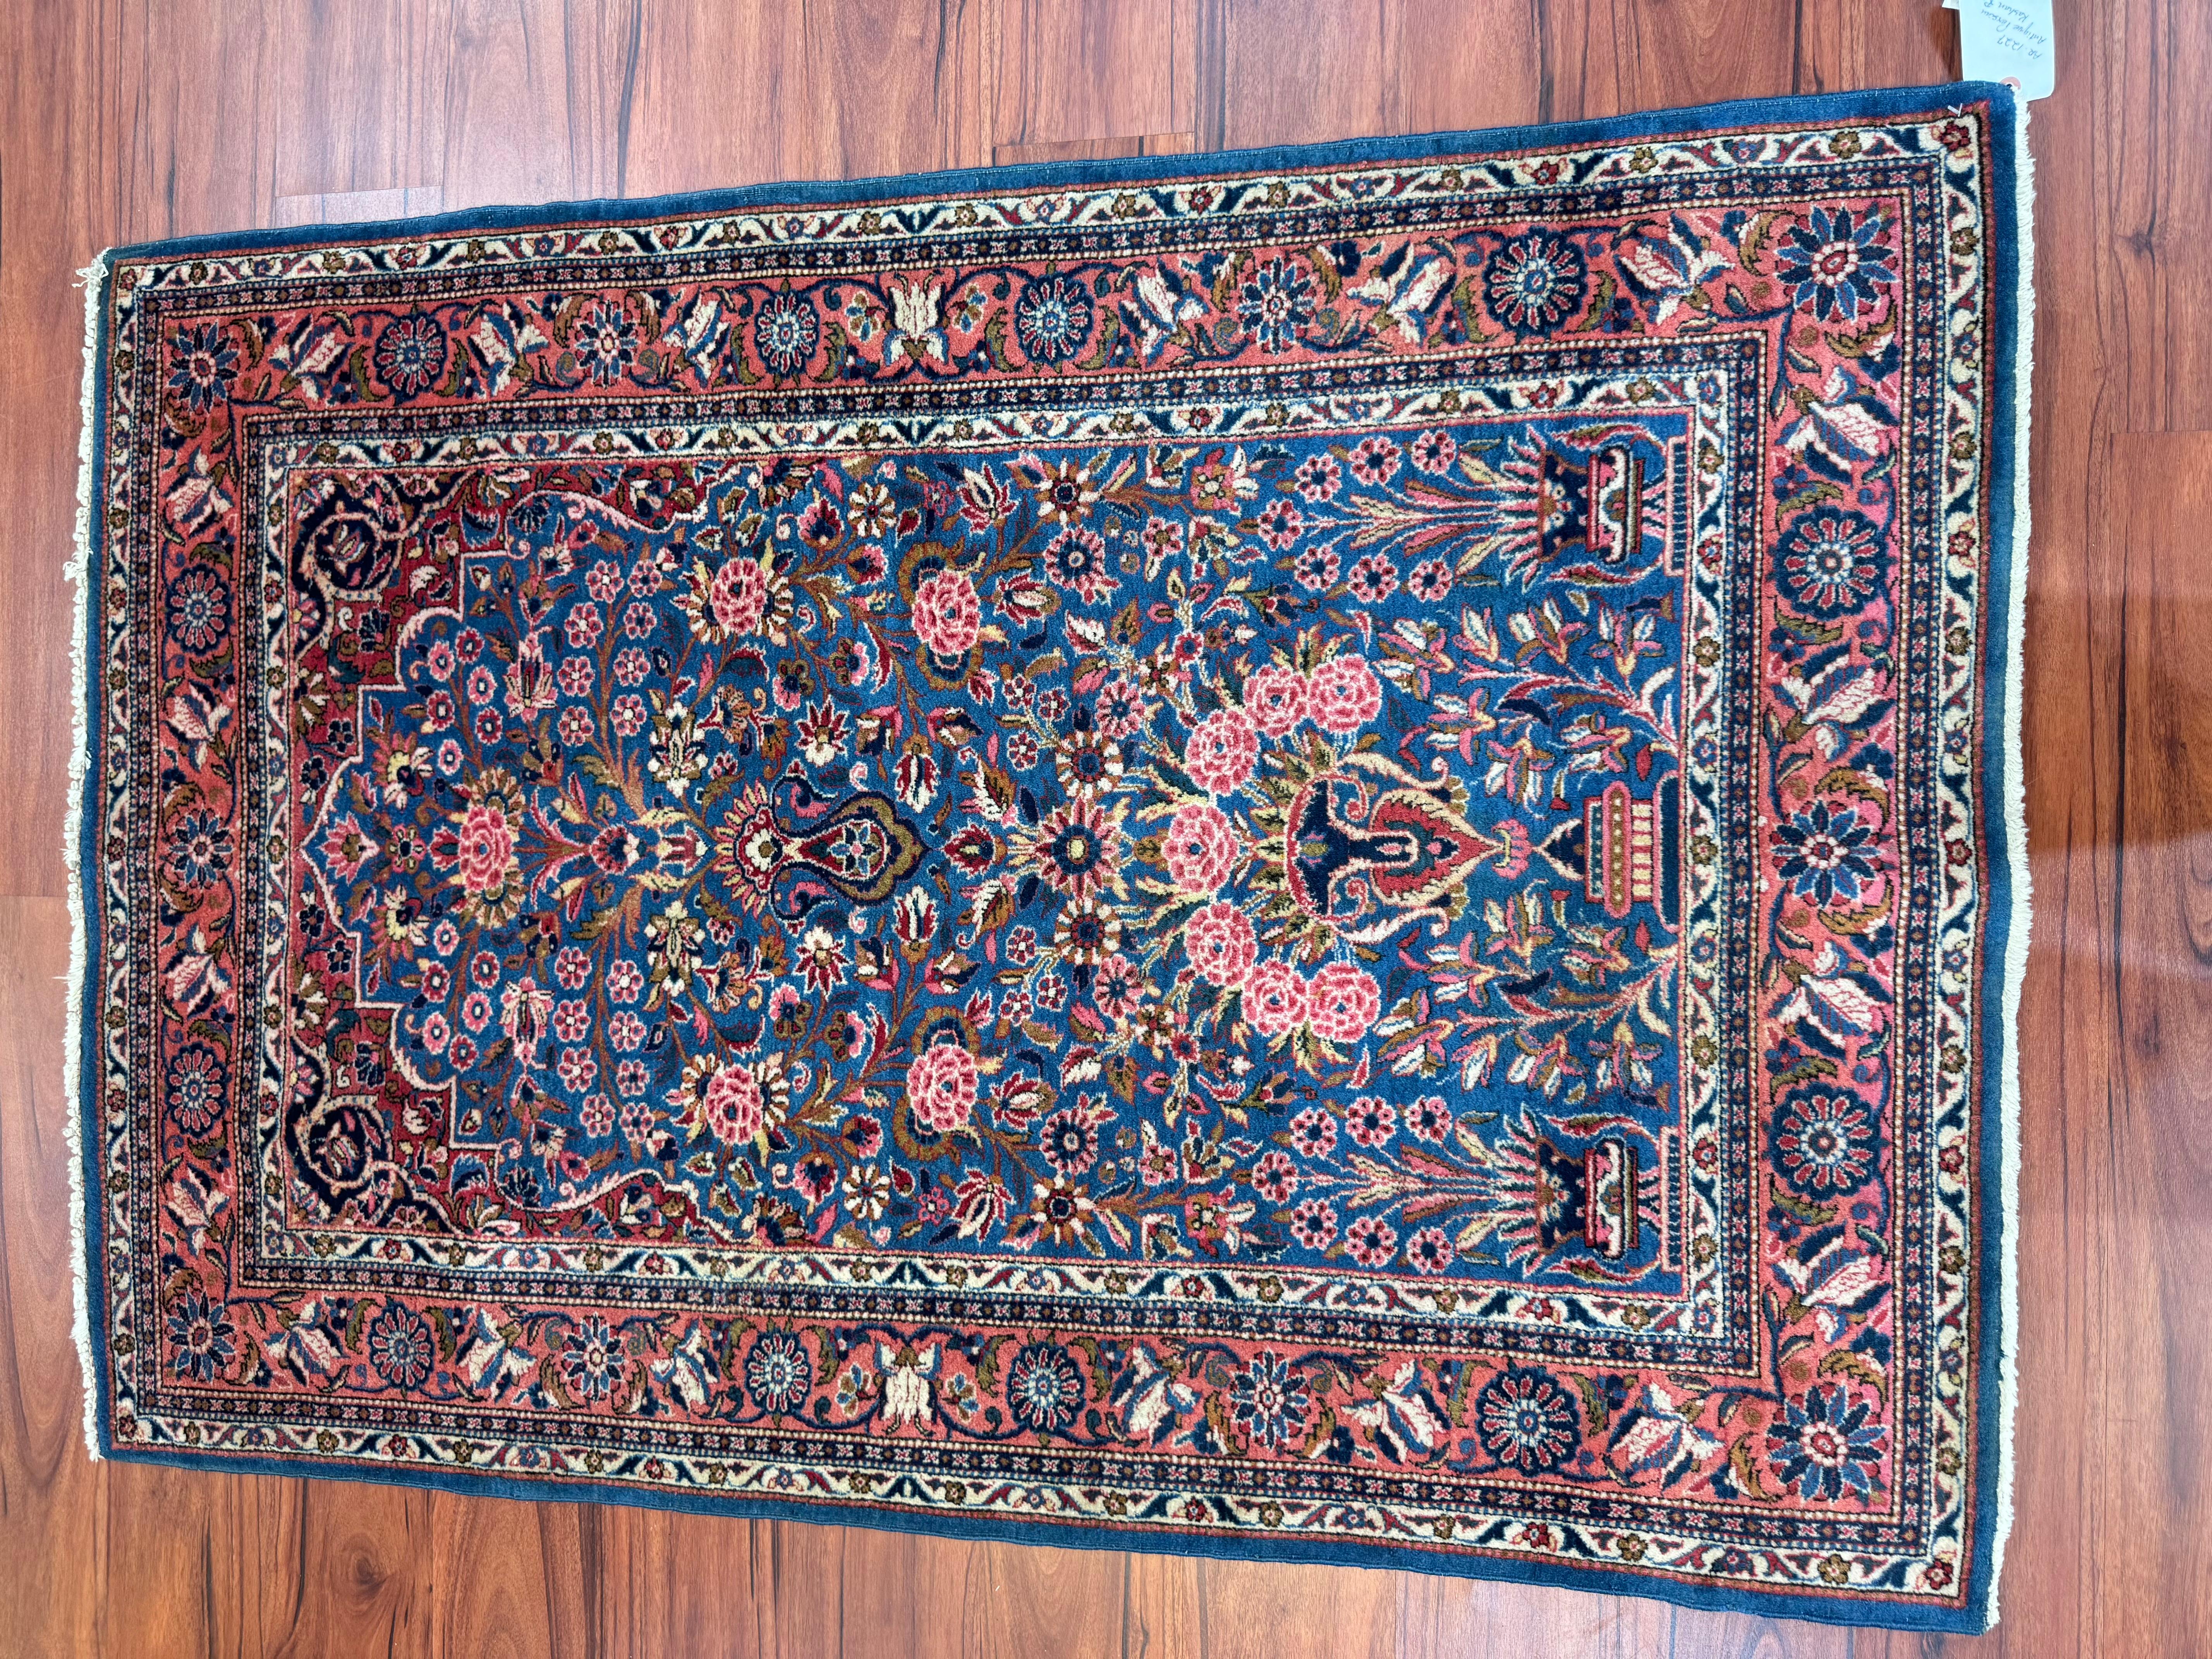 A stunning antique persian kashan rug that originates from Iran in the early 20th century. This piece is in excellent condition considering its rich history and has beautiful colors. Feel free to message me in regards to this listing or any other